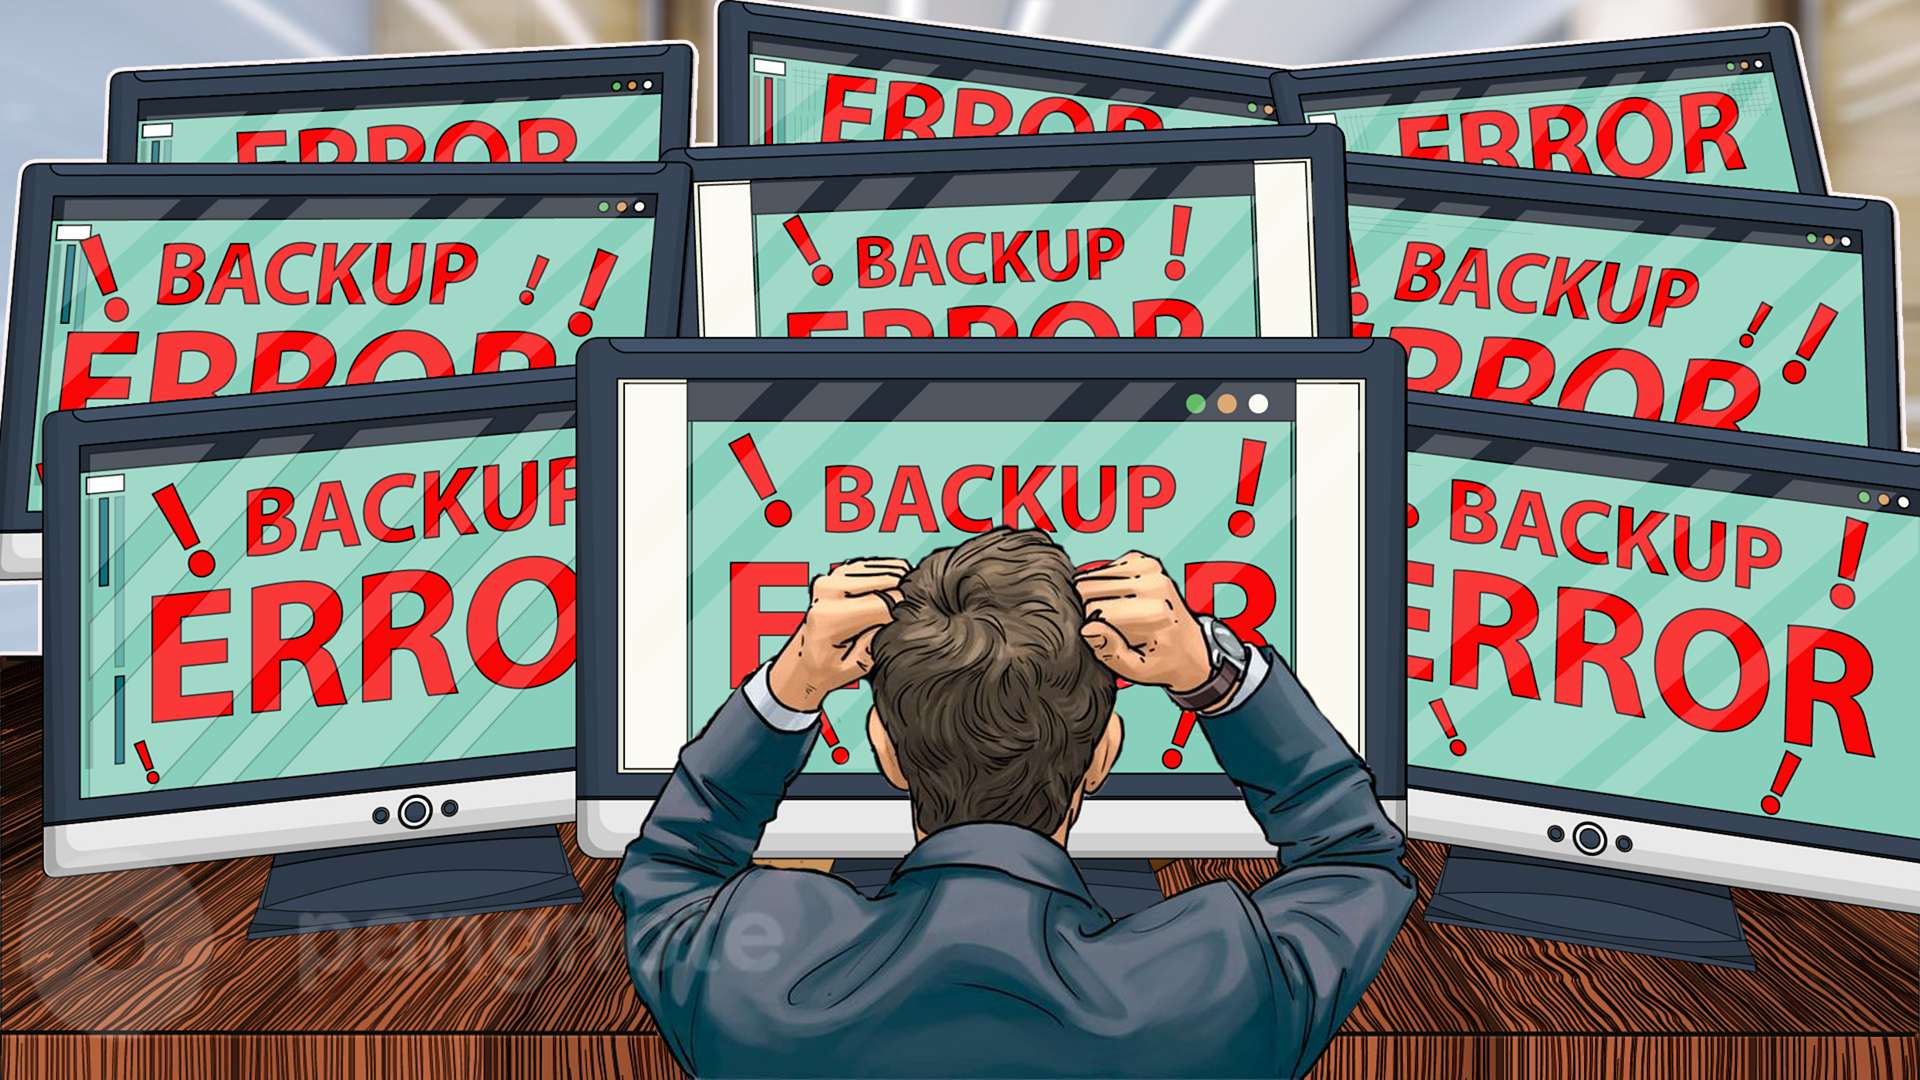 Tips on how to avoid problems with the creation and recovery of backup